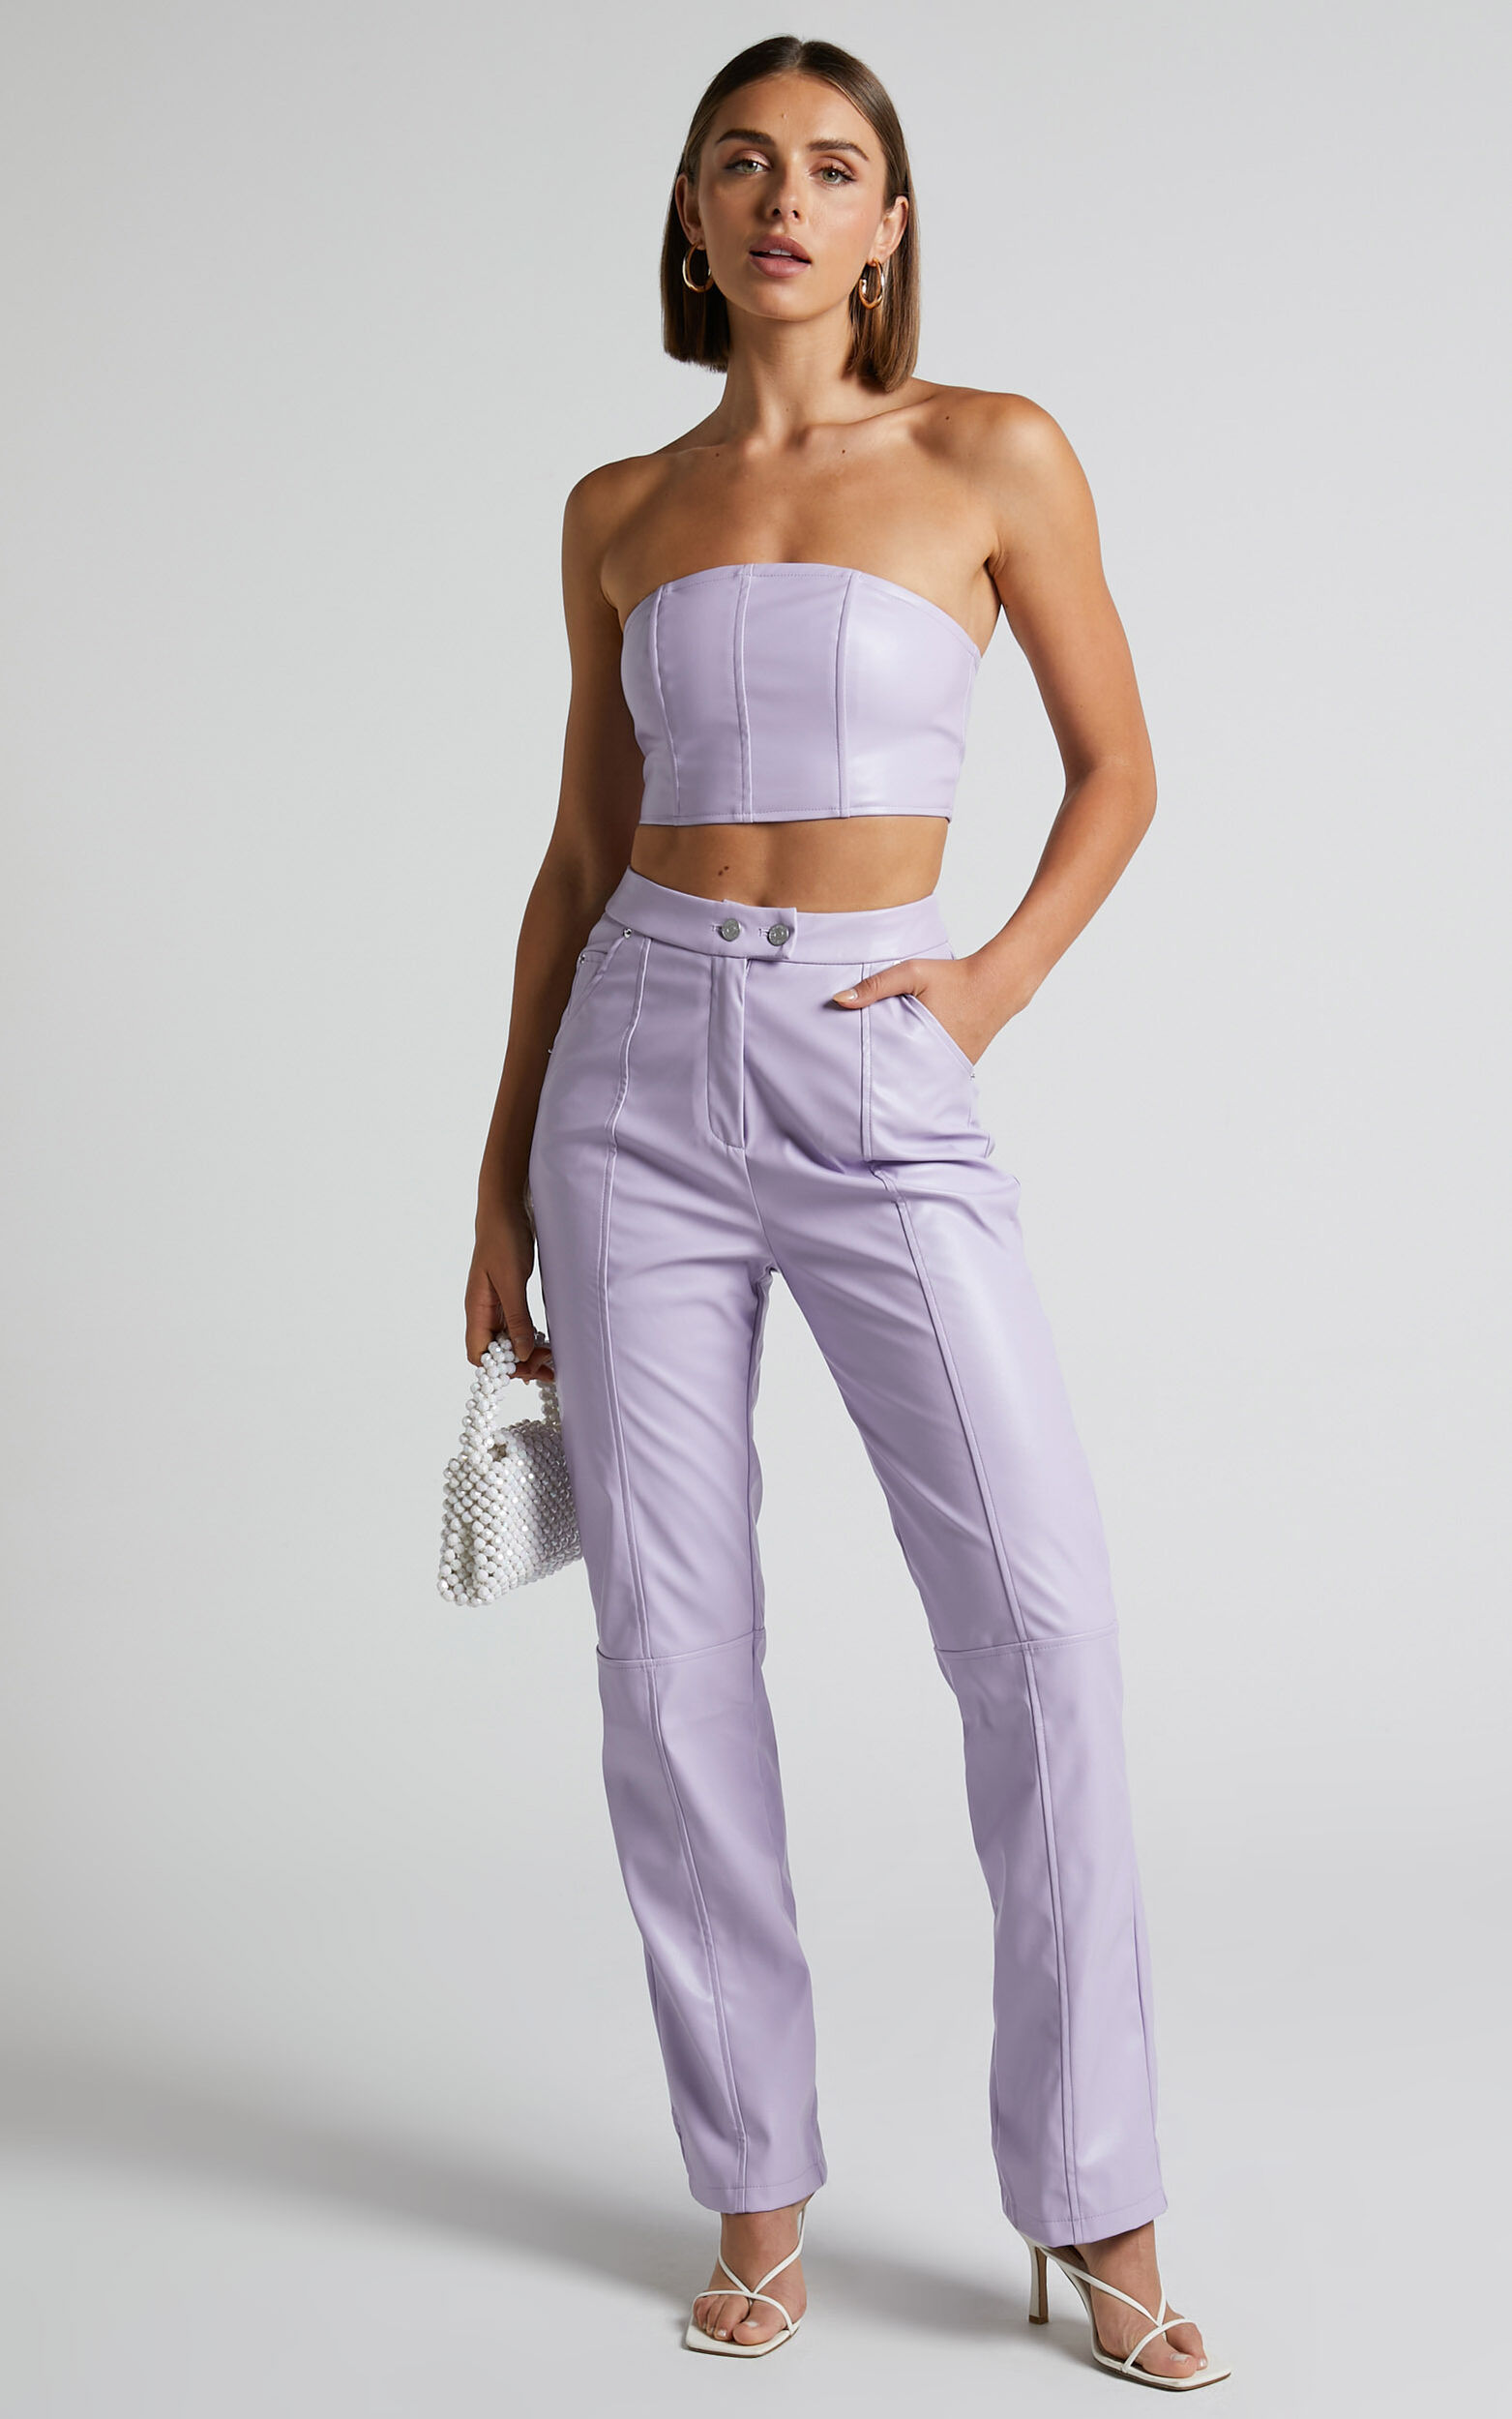 4th & Reckless - Tropez Leather Trouser in Lilac - 06, PRP1